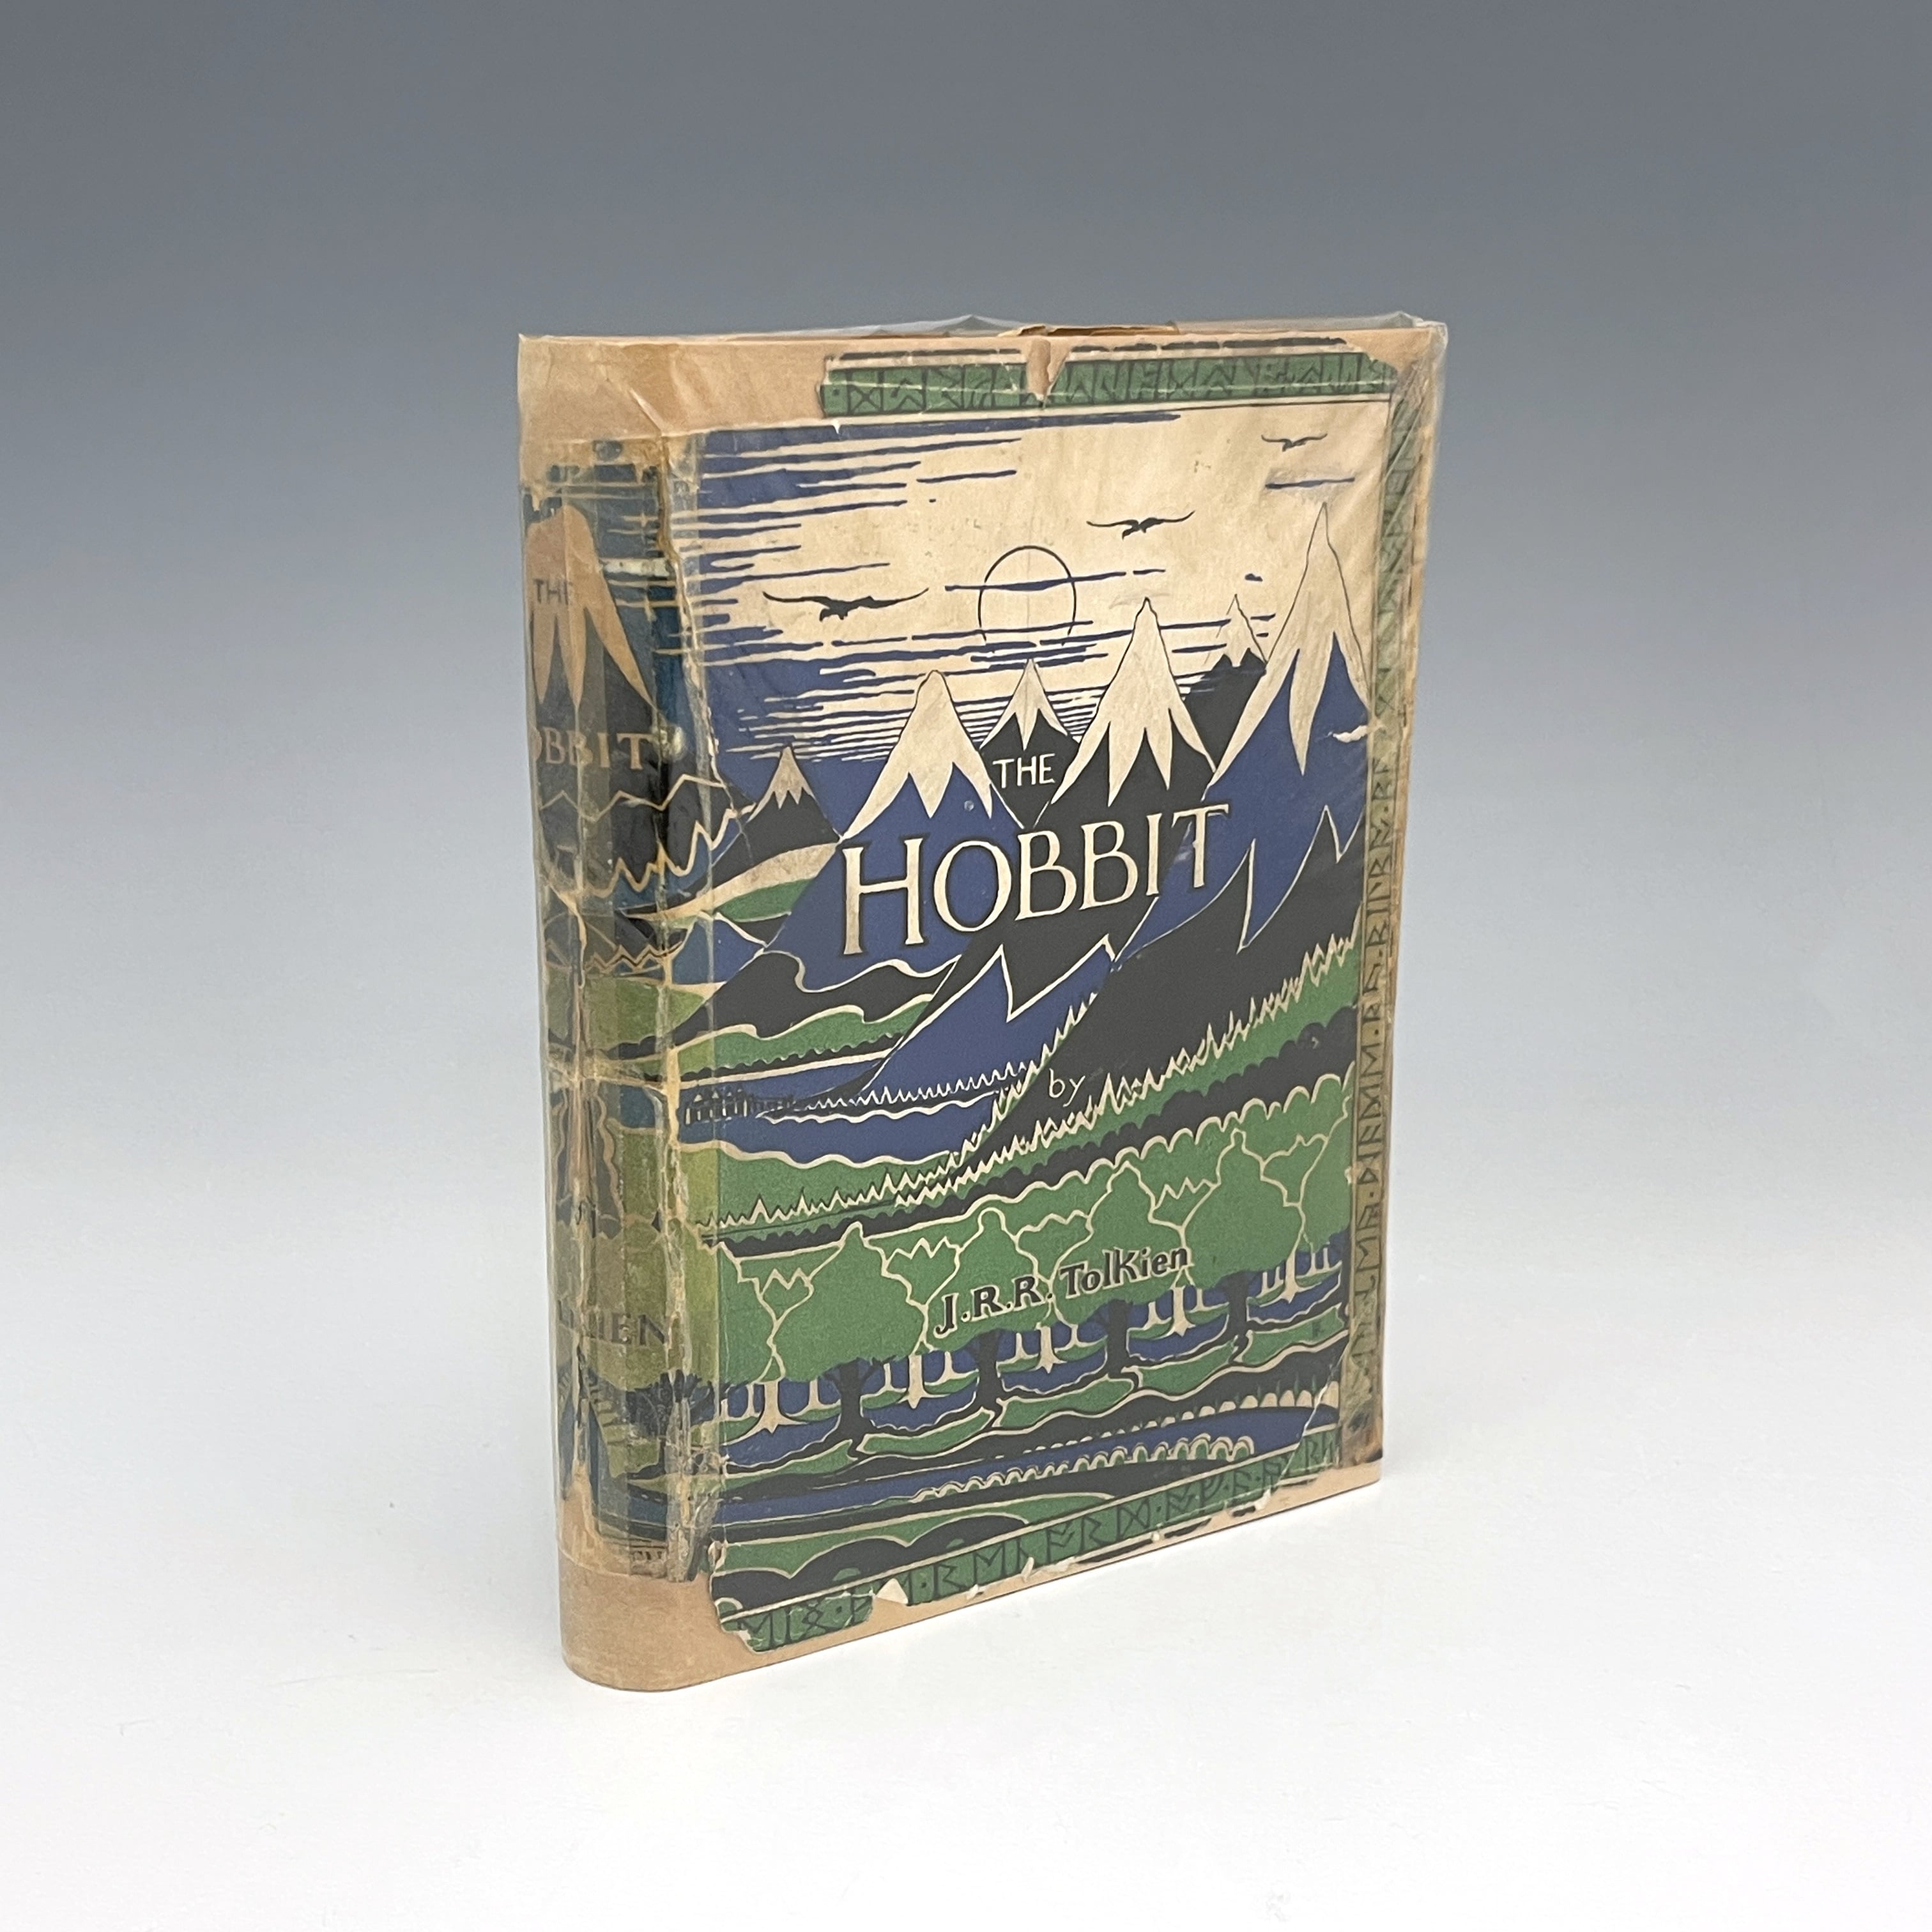 Rare First Edition of Tolkien's 'Hobbit' Discovery